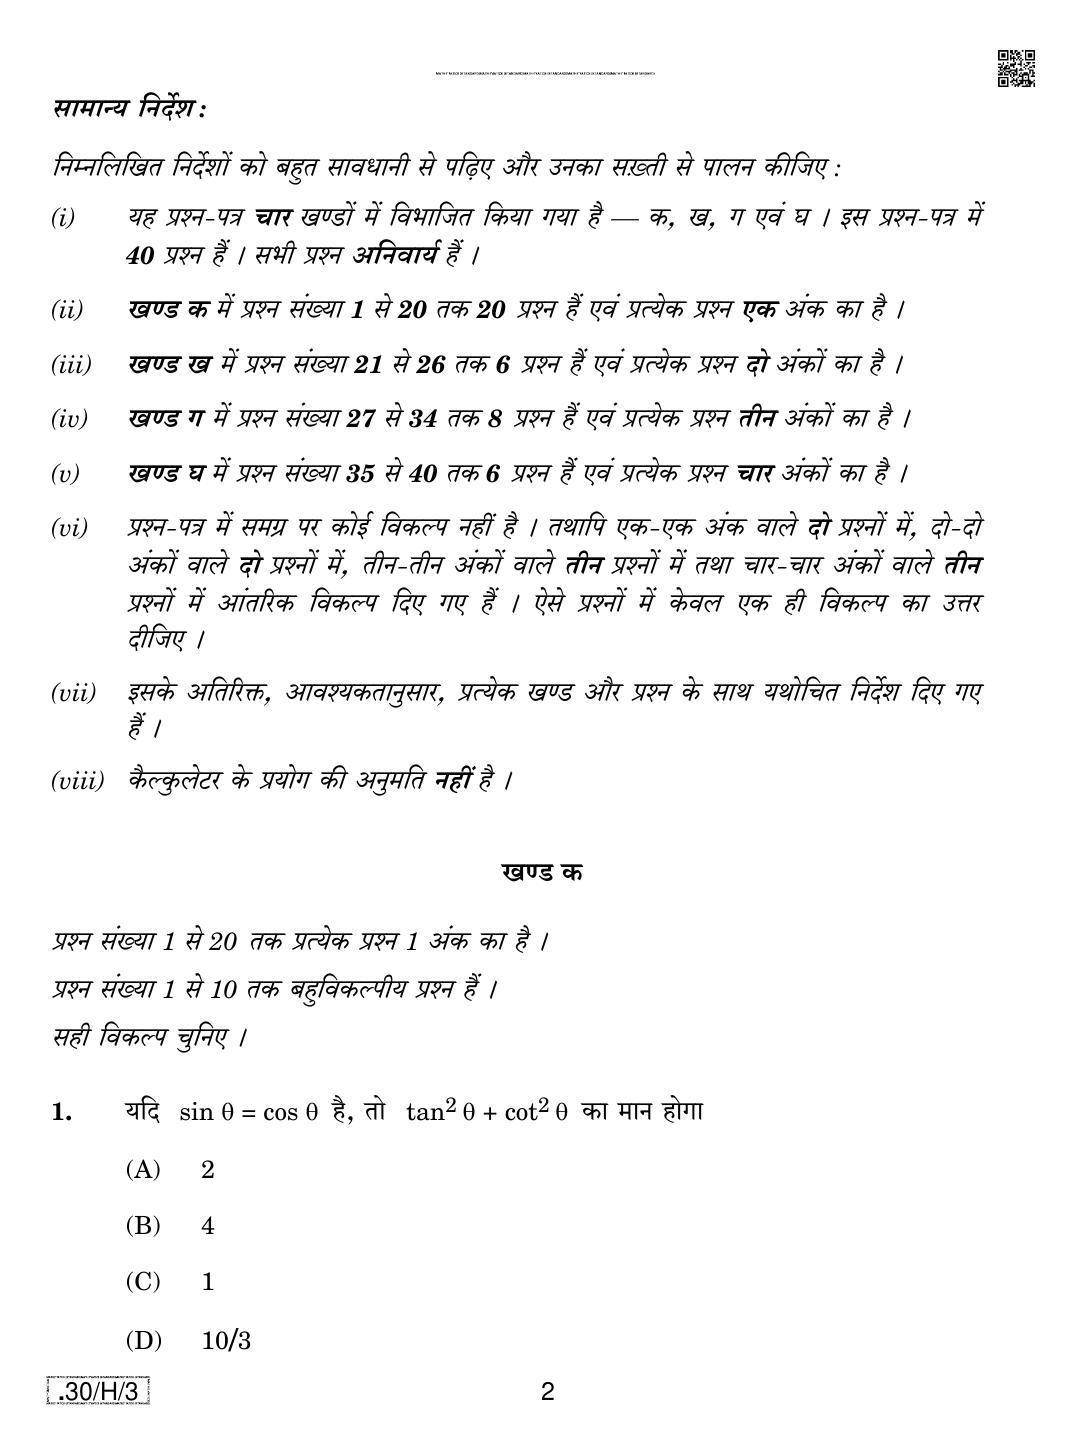 CBSE Class 10 30-C-3 - Maths (Standard) 2020 Compartment Question Paper - Page 2